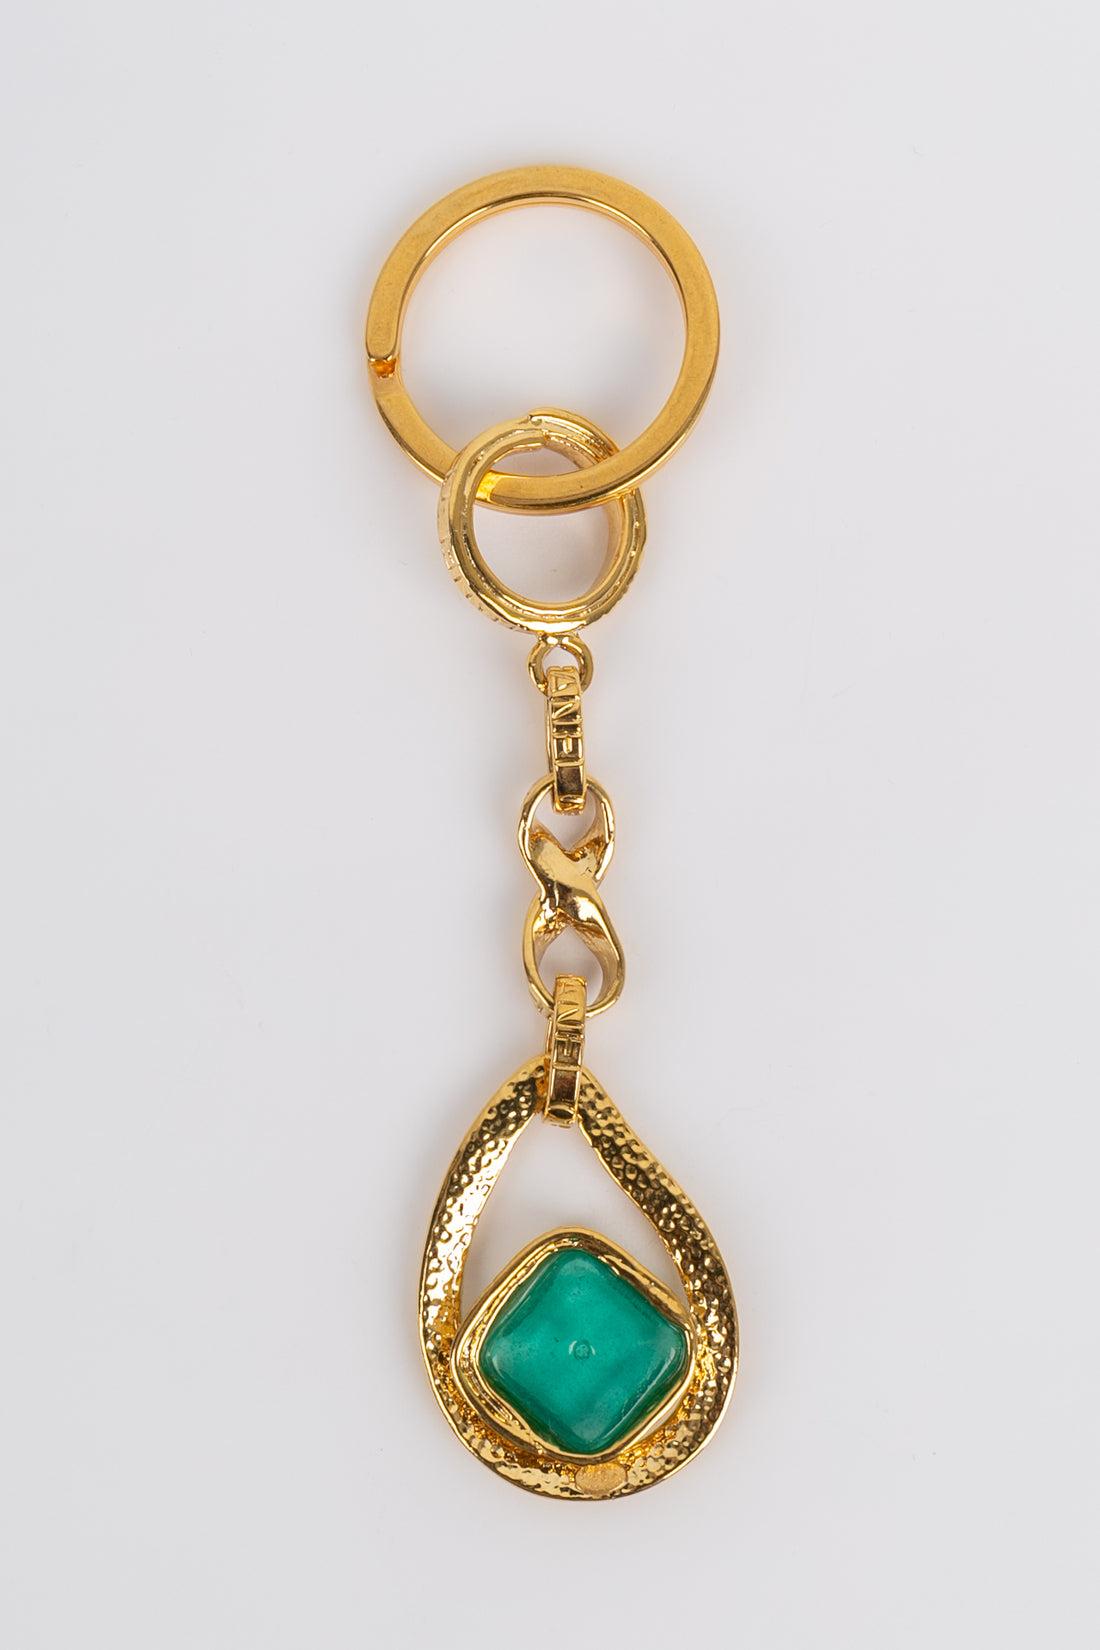 Chanel - (Made in France) Keychain in gilded metal and glass paste cabochons. Spring-Summer 1996 collection.

Additional information: 
Dimensions: Length: 12.3 cm
Condition: Very good condition
Seller Ref number: BARB1